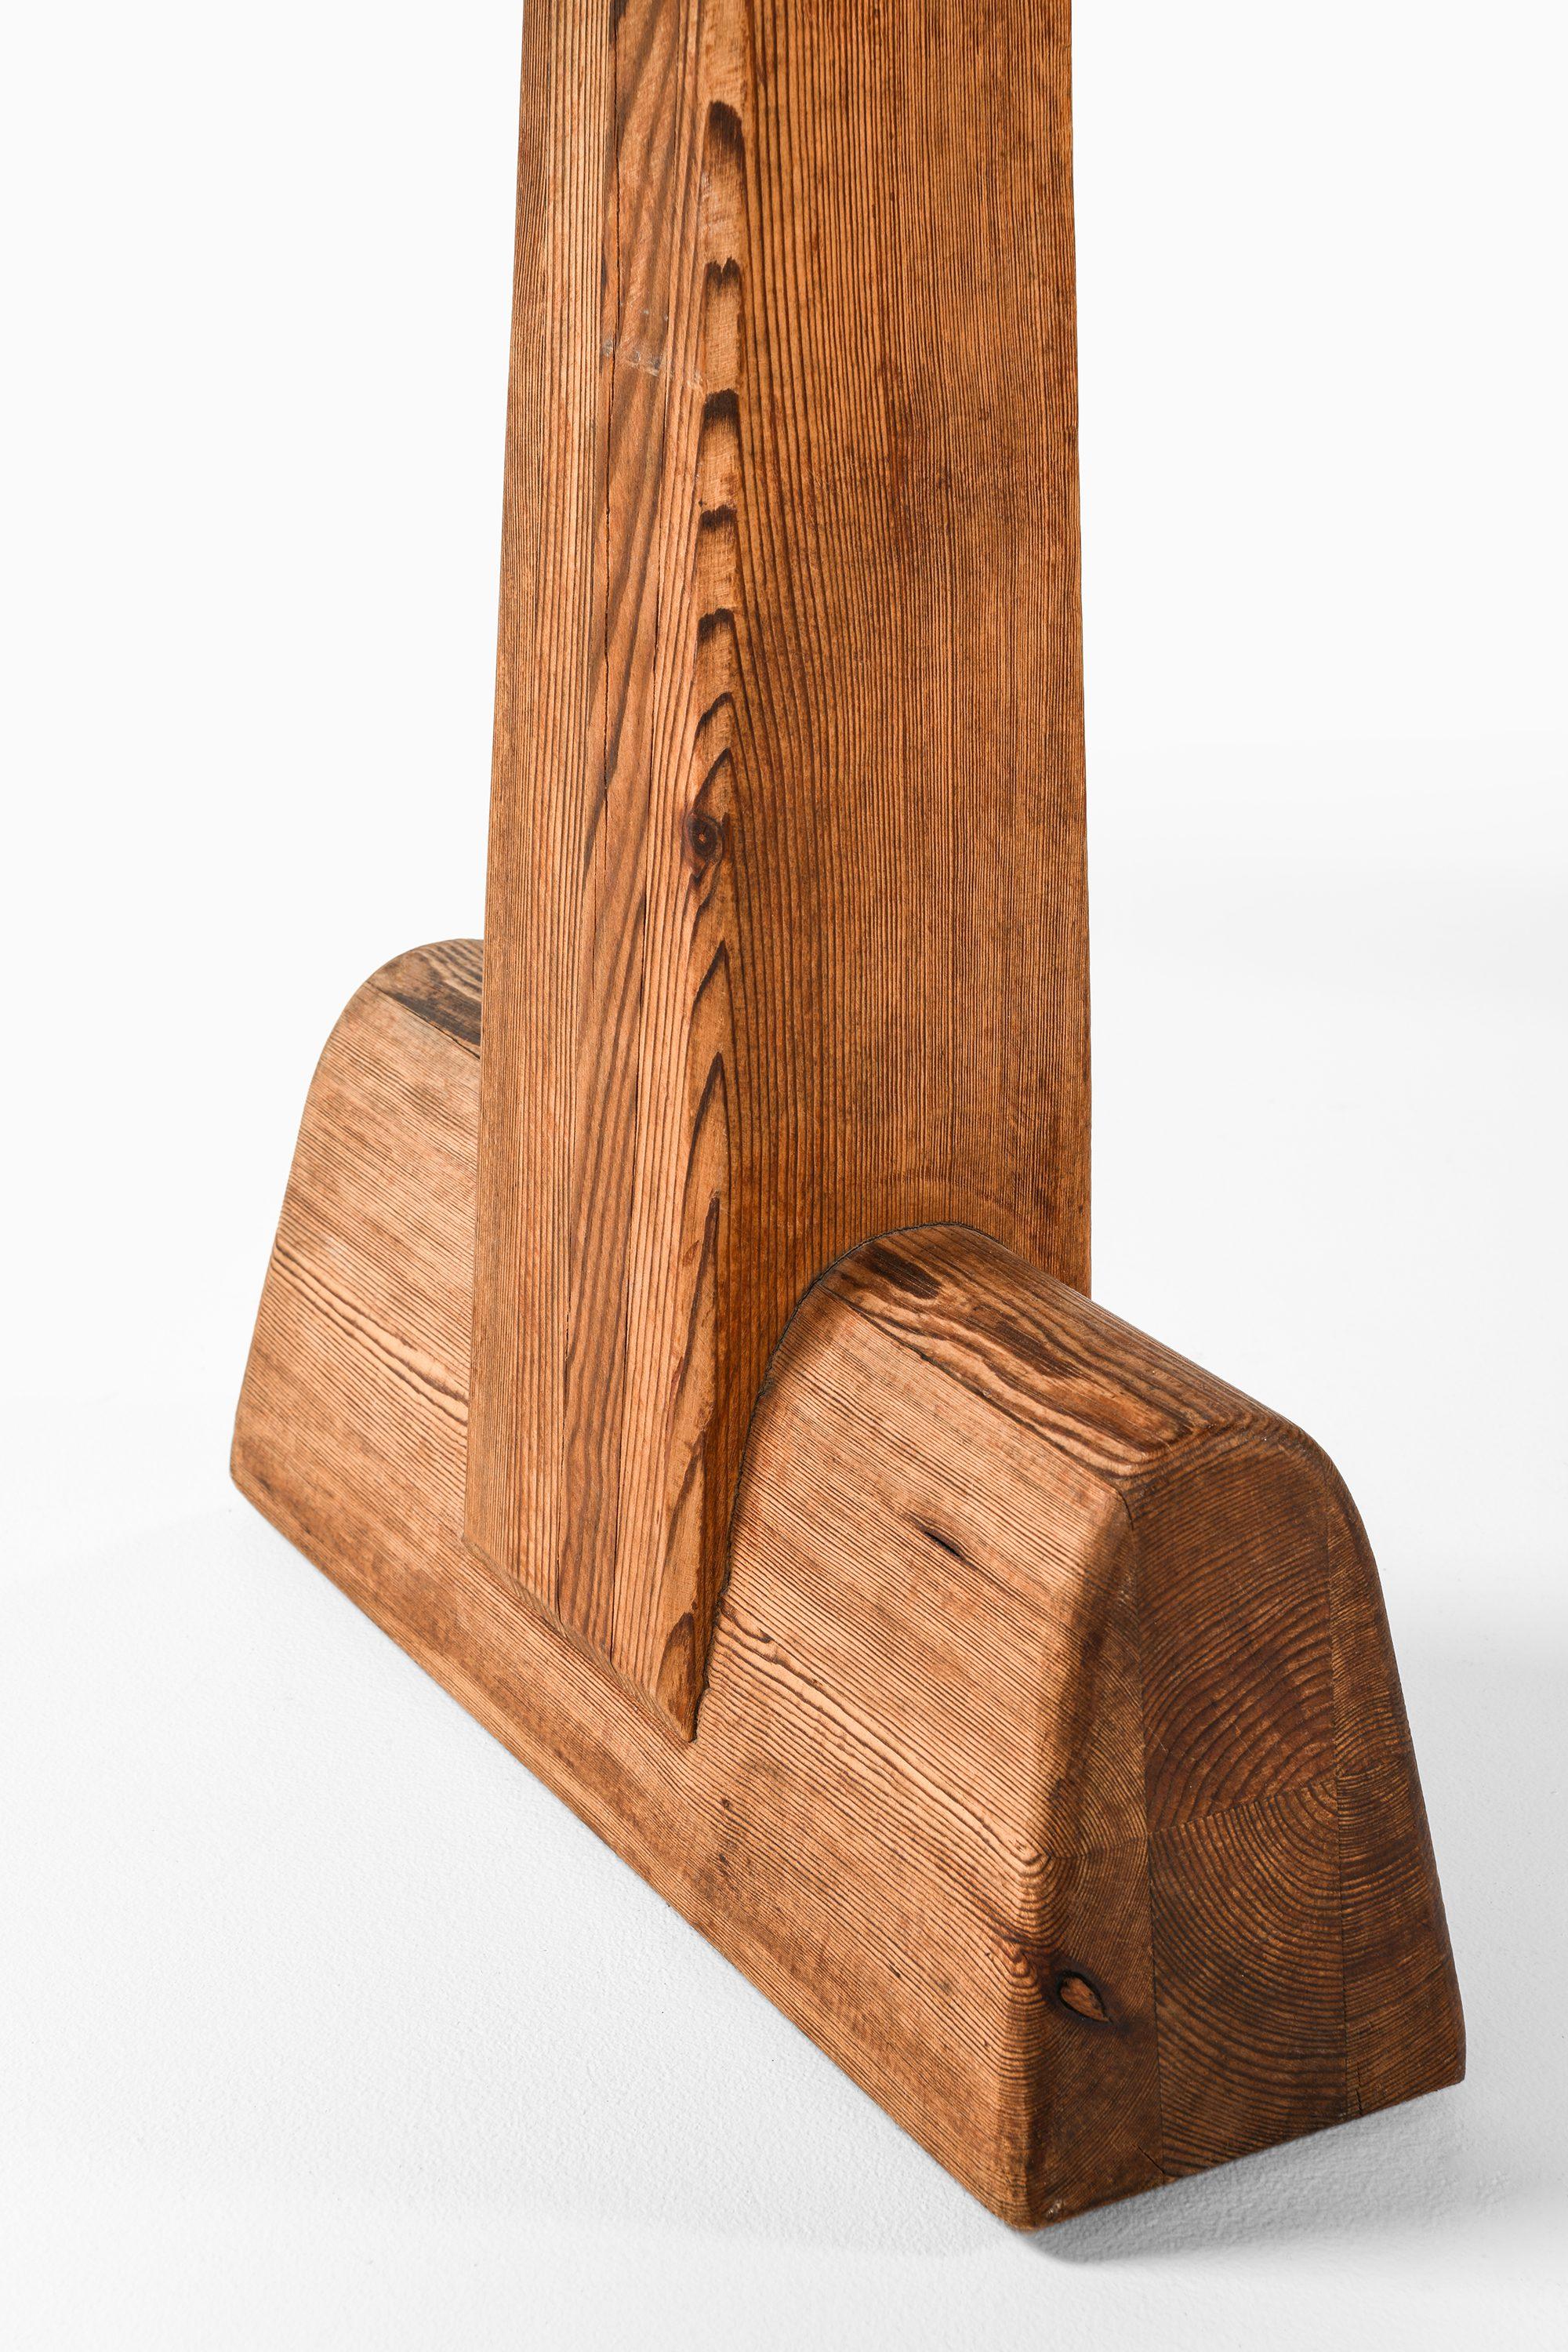 Library / Console Table in Acid-Stained Pine by Axel Einar Hjorth, 1932 For Sale 1